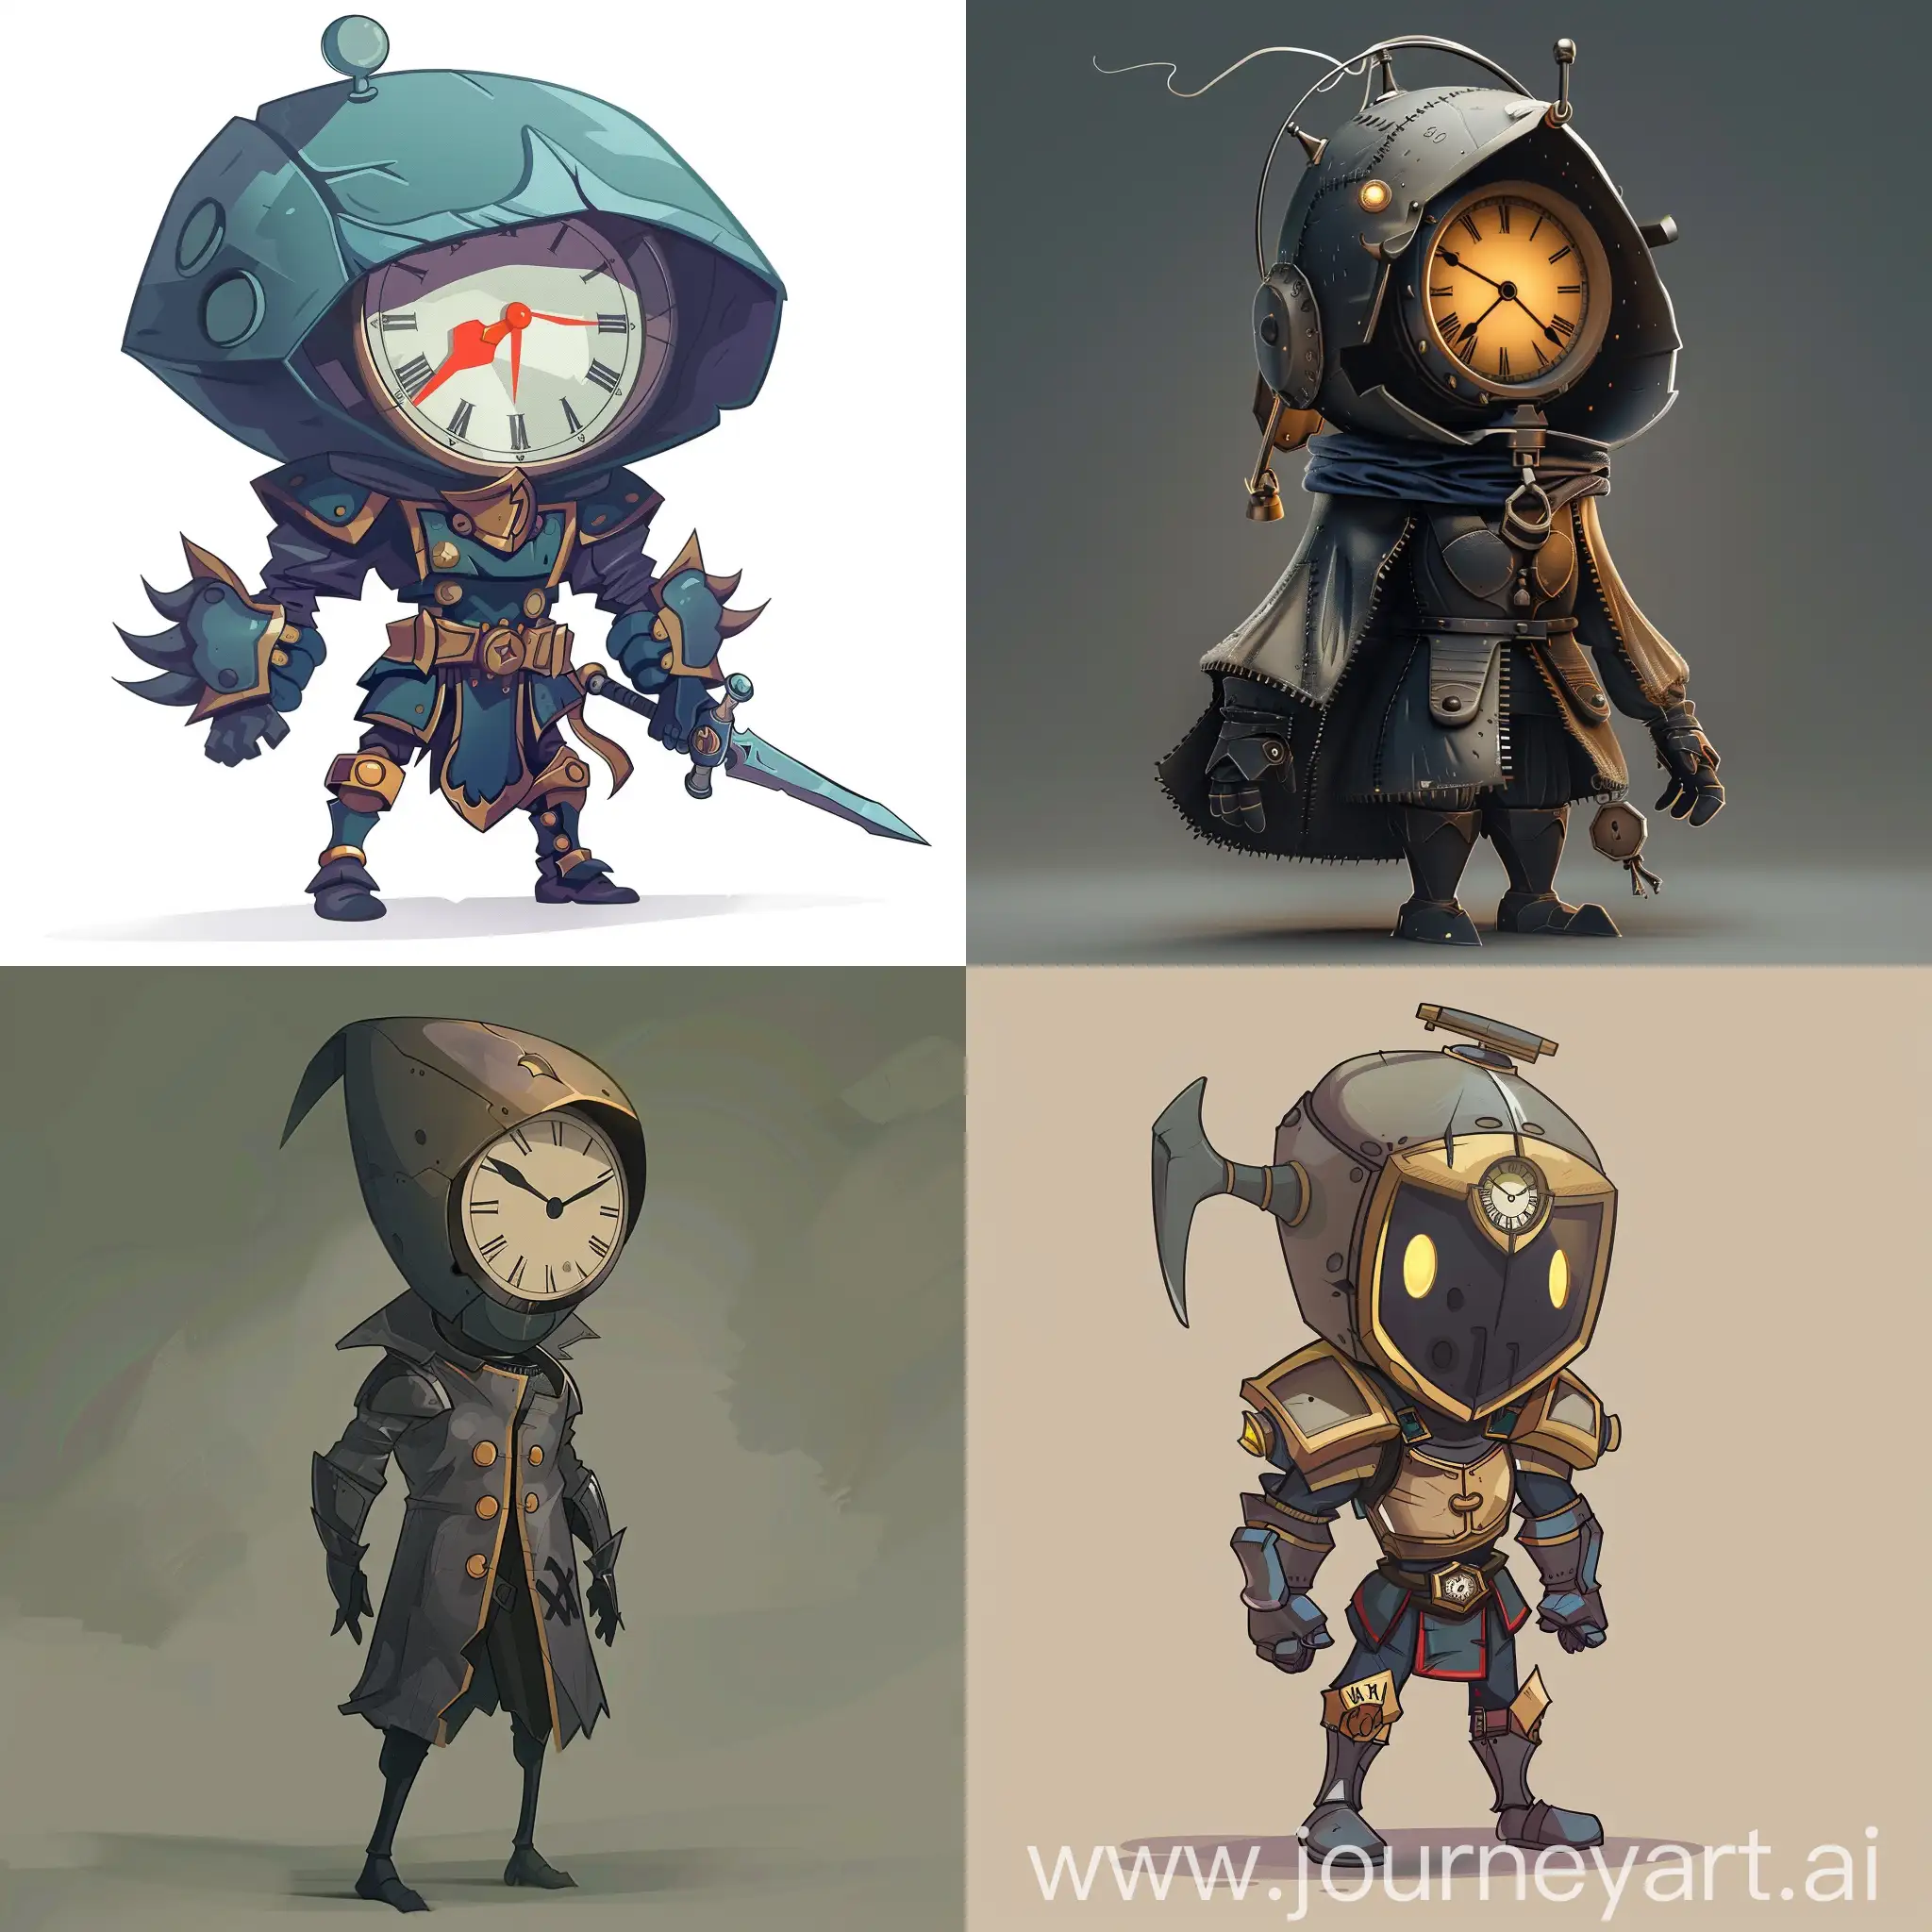 2d game hero character design, with a clock-shaped head, hollow knight style, indie game art style